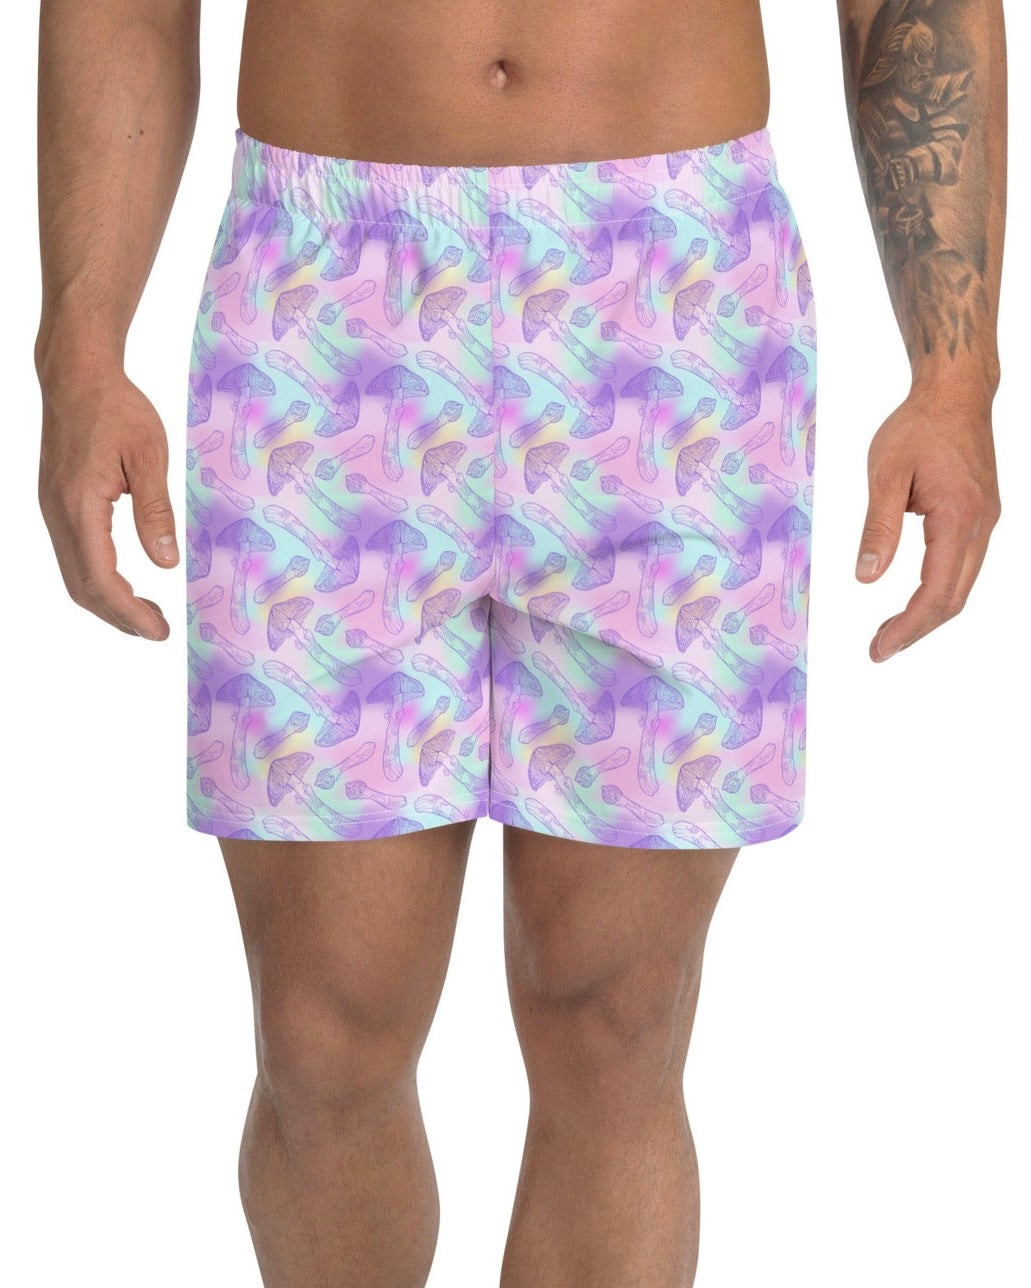 Mad Catter Men's Athletic Shorts